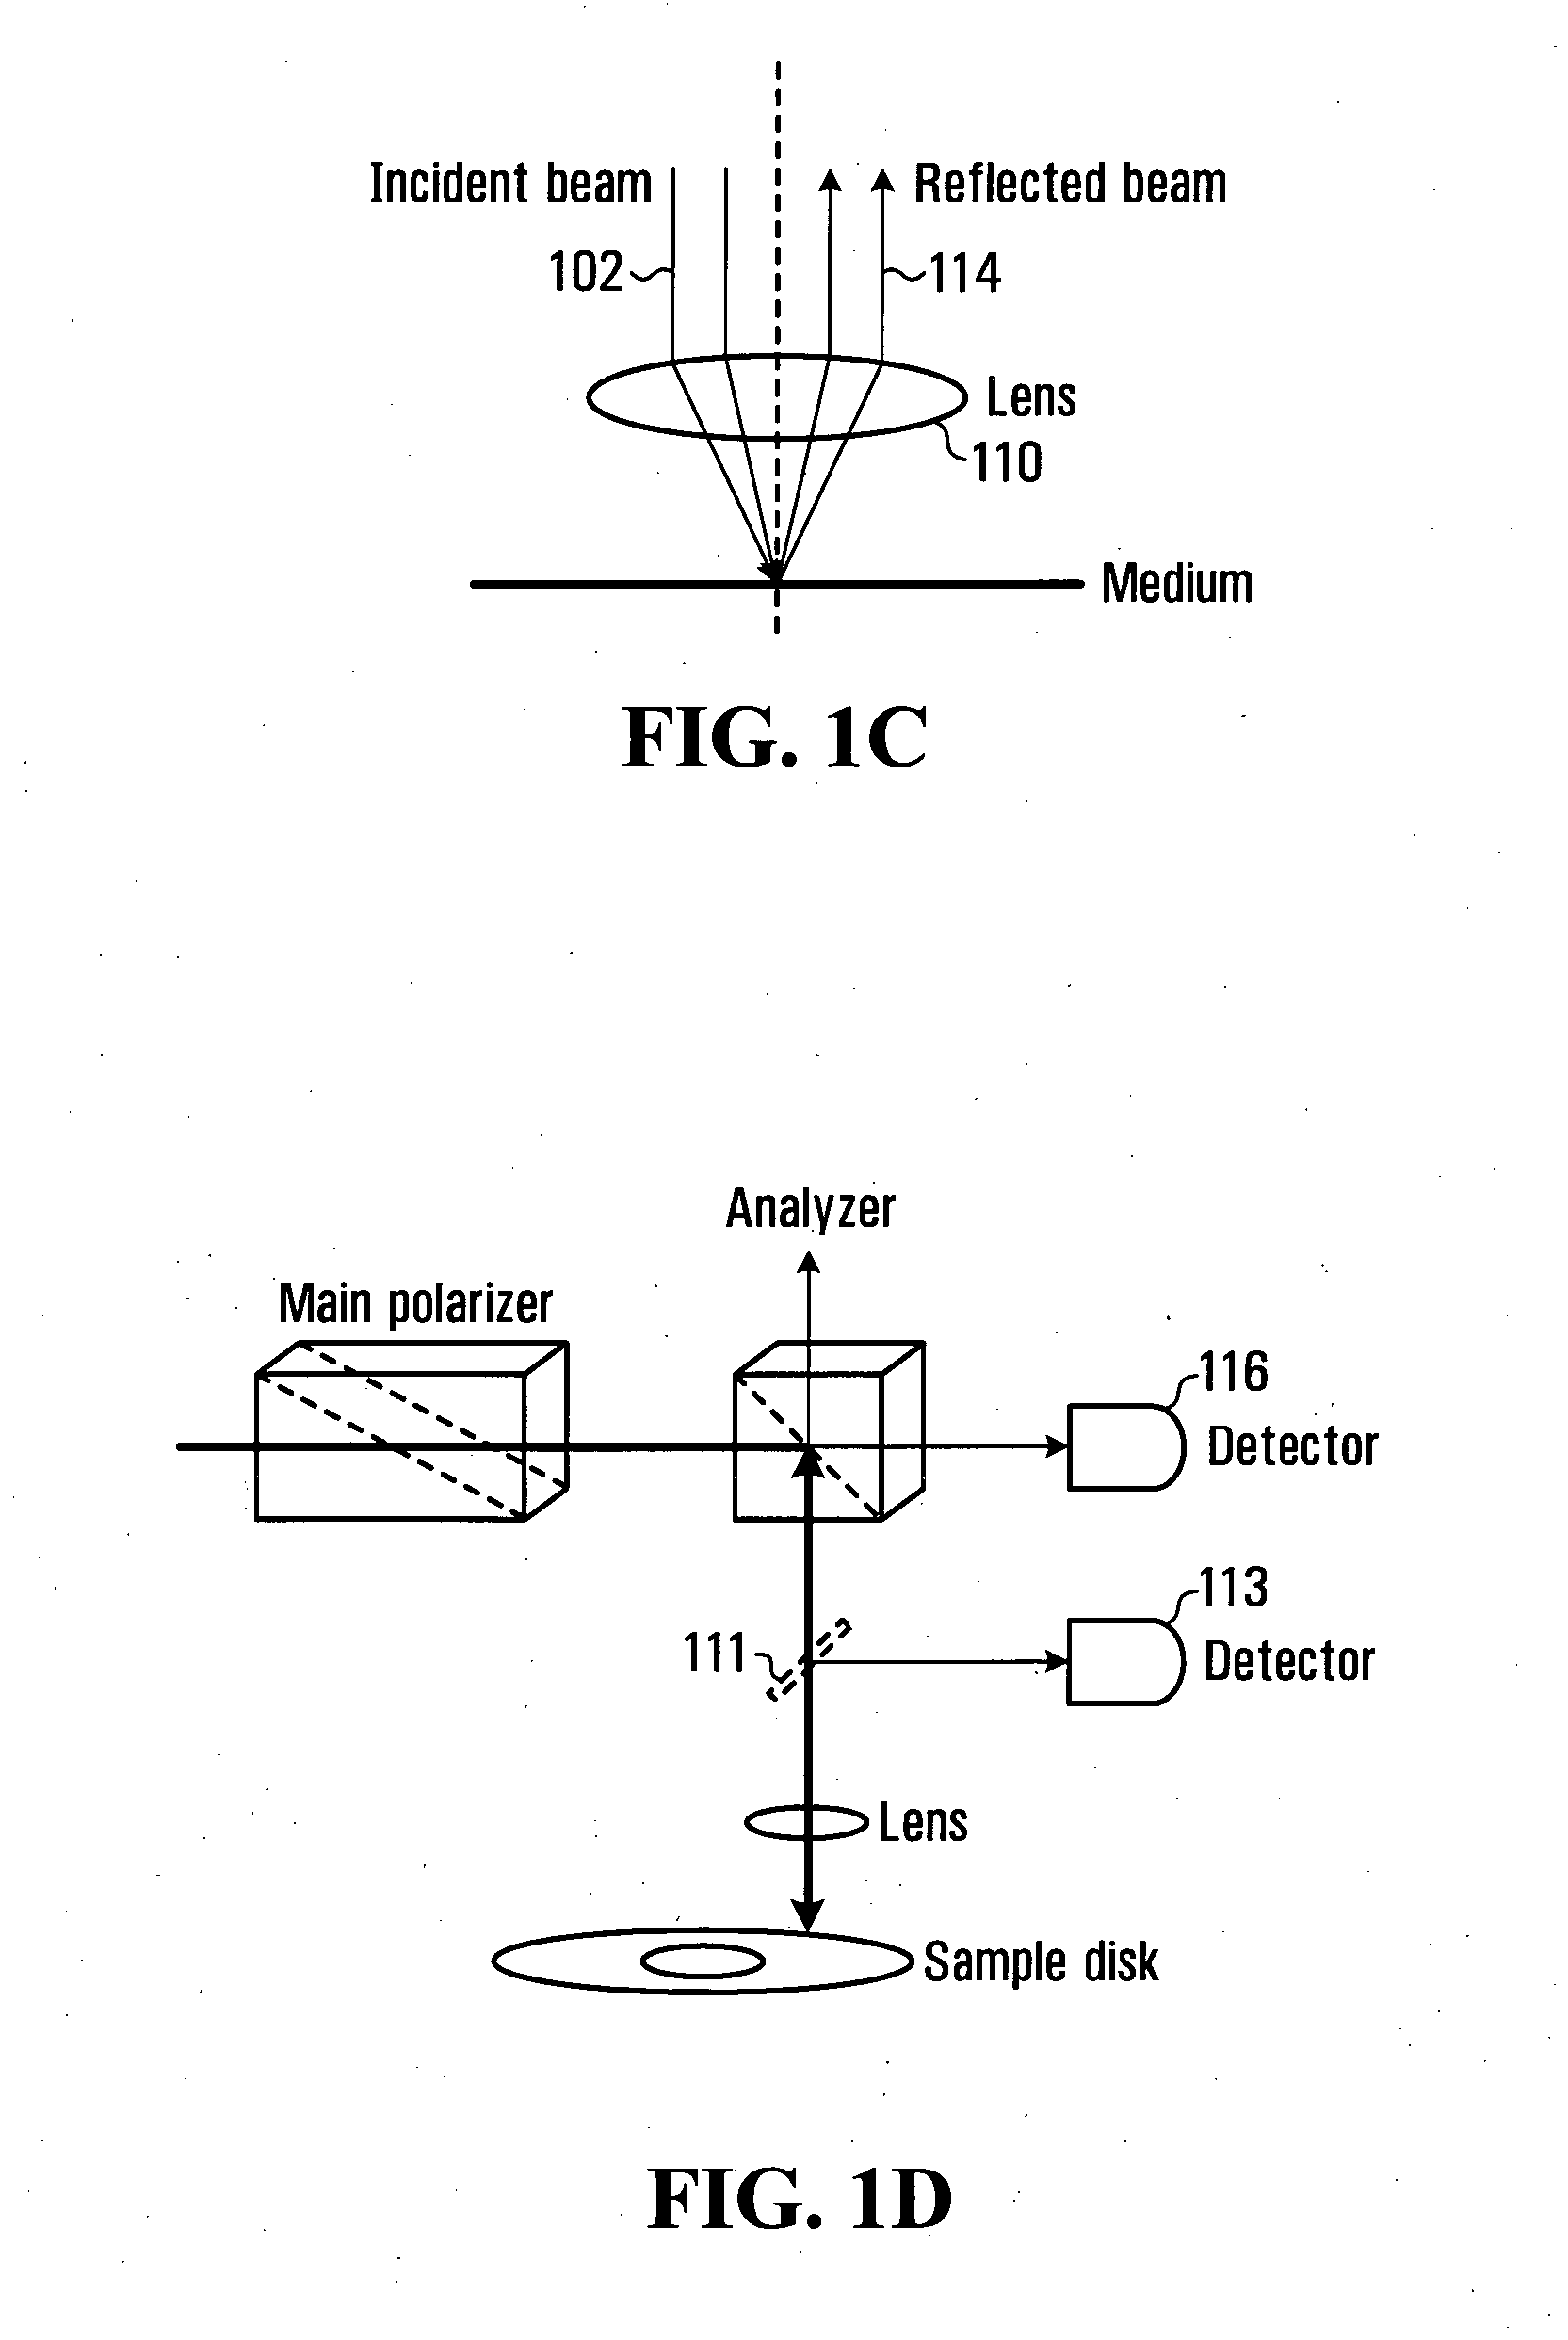 Method and apparatus for determining thermal magnetic properties of magnetic media